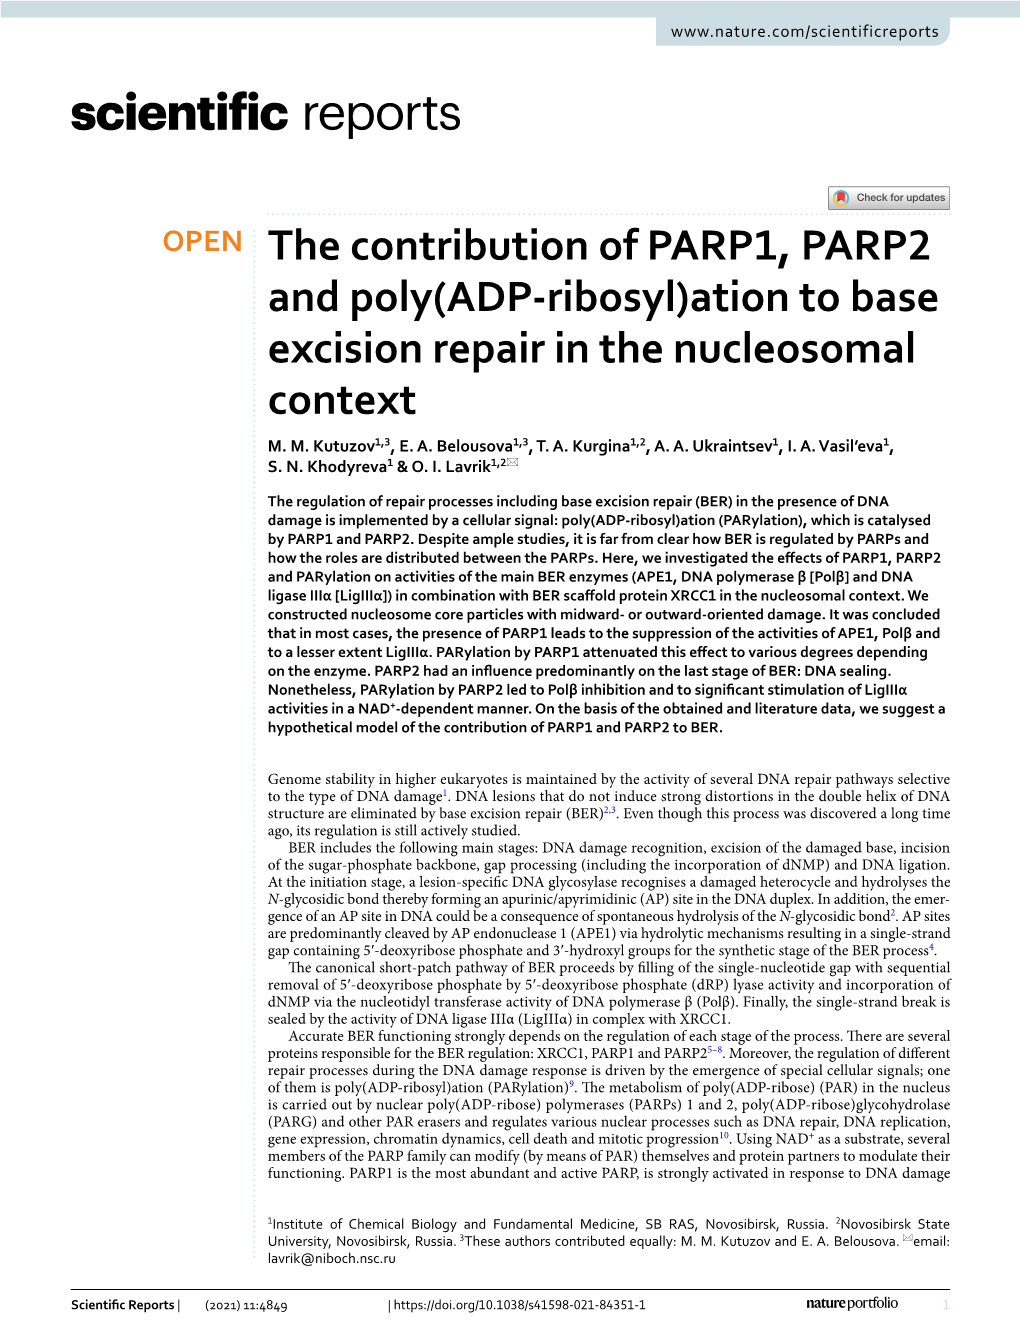 The Contribution of PARP1, PARP2 and Poly(ADP-Ribosyl)